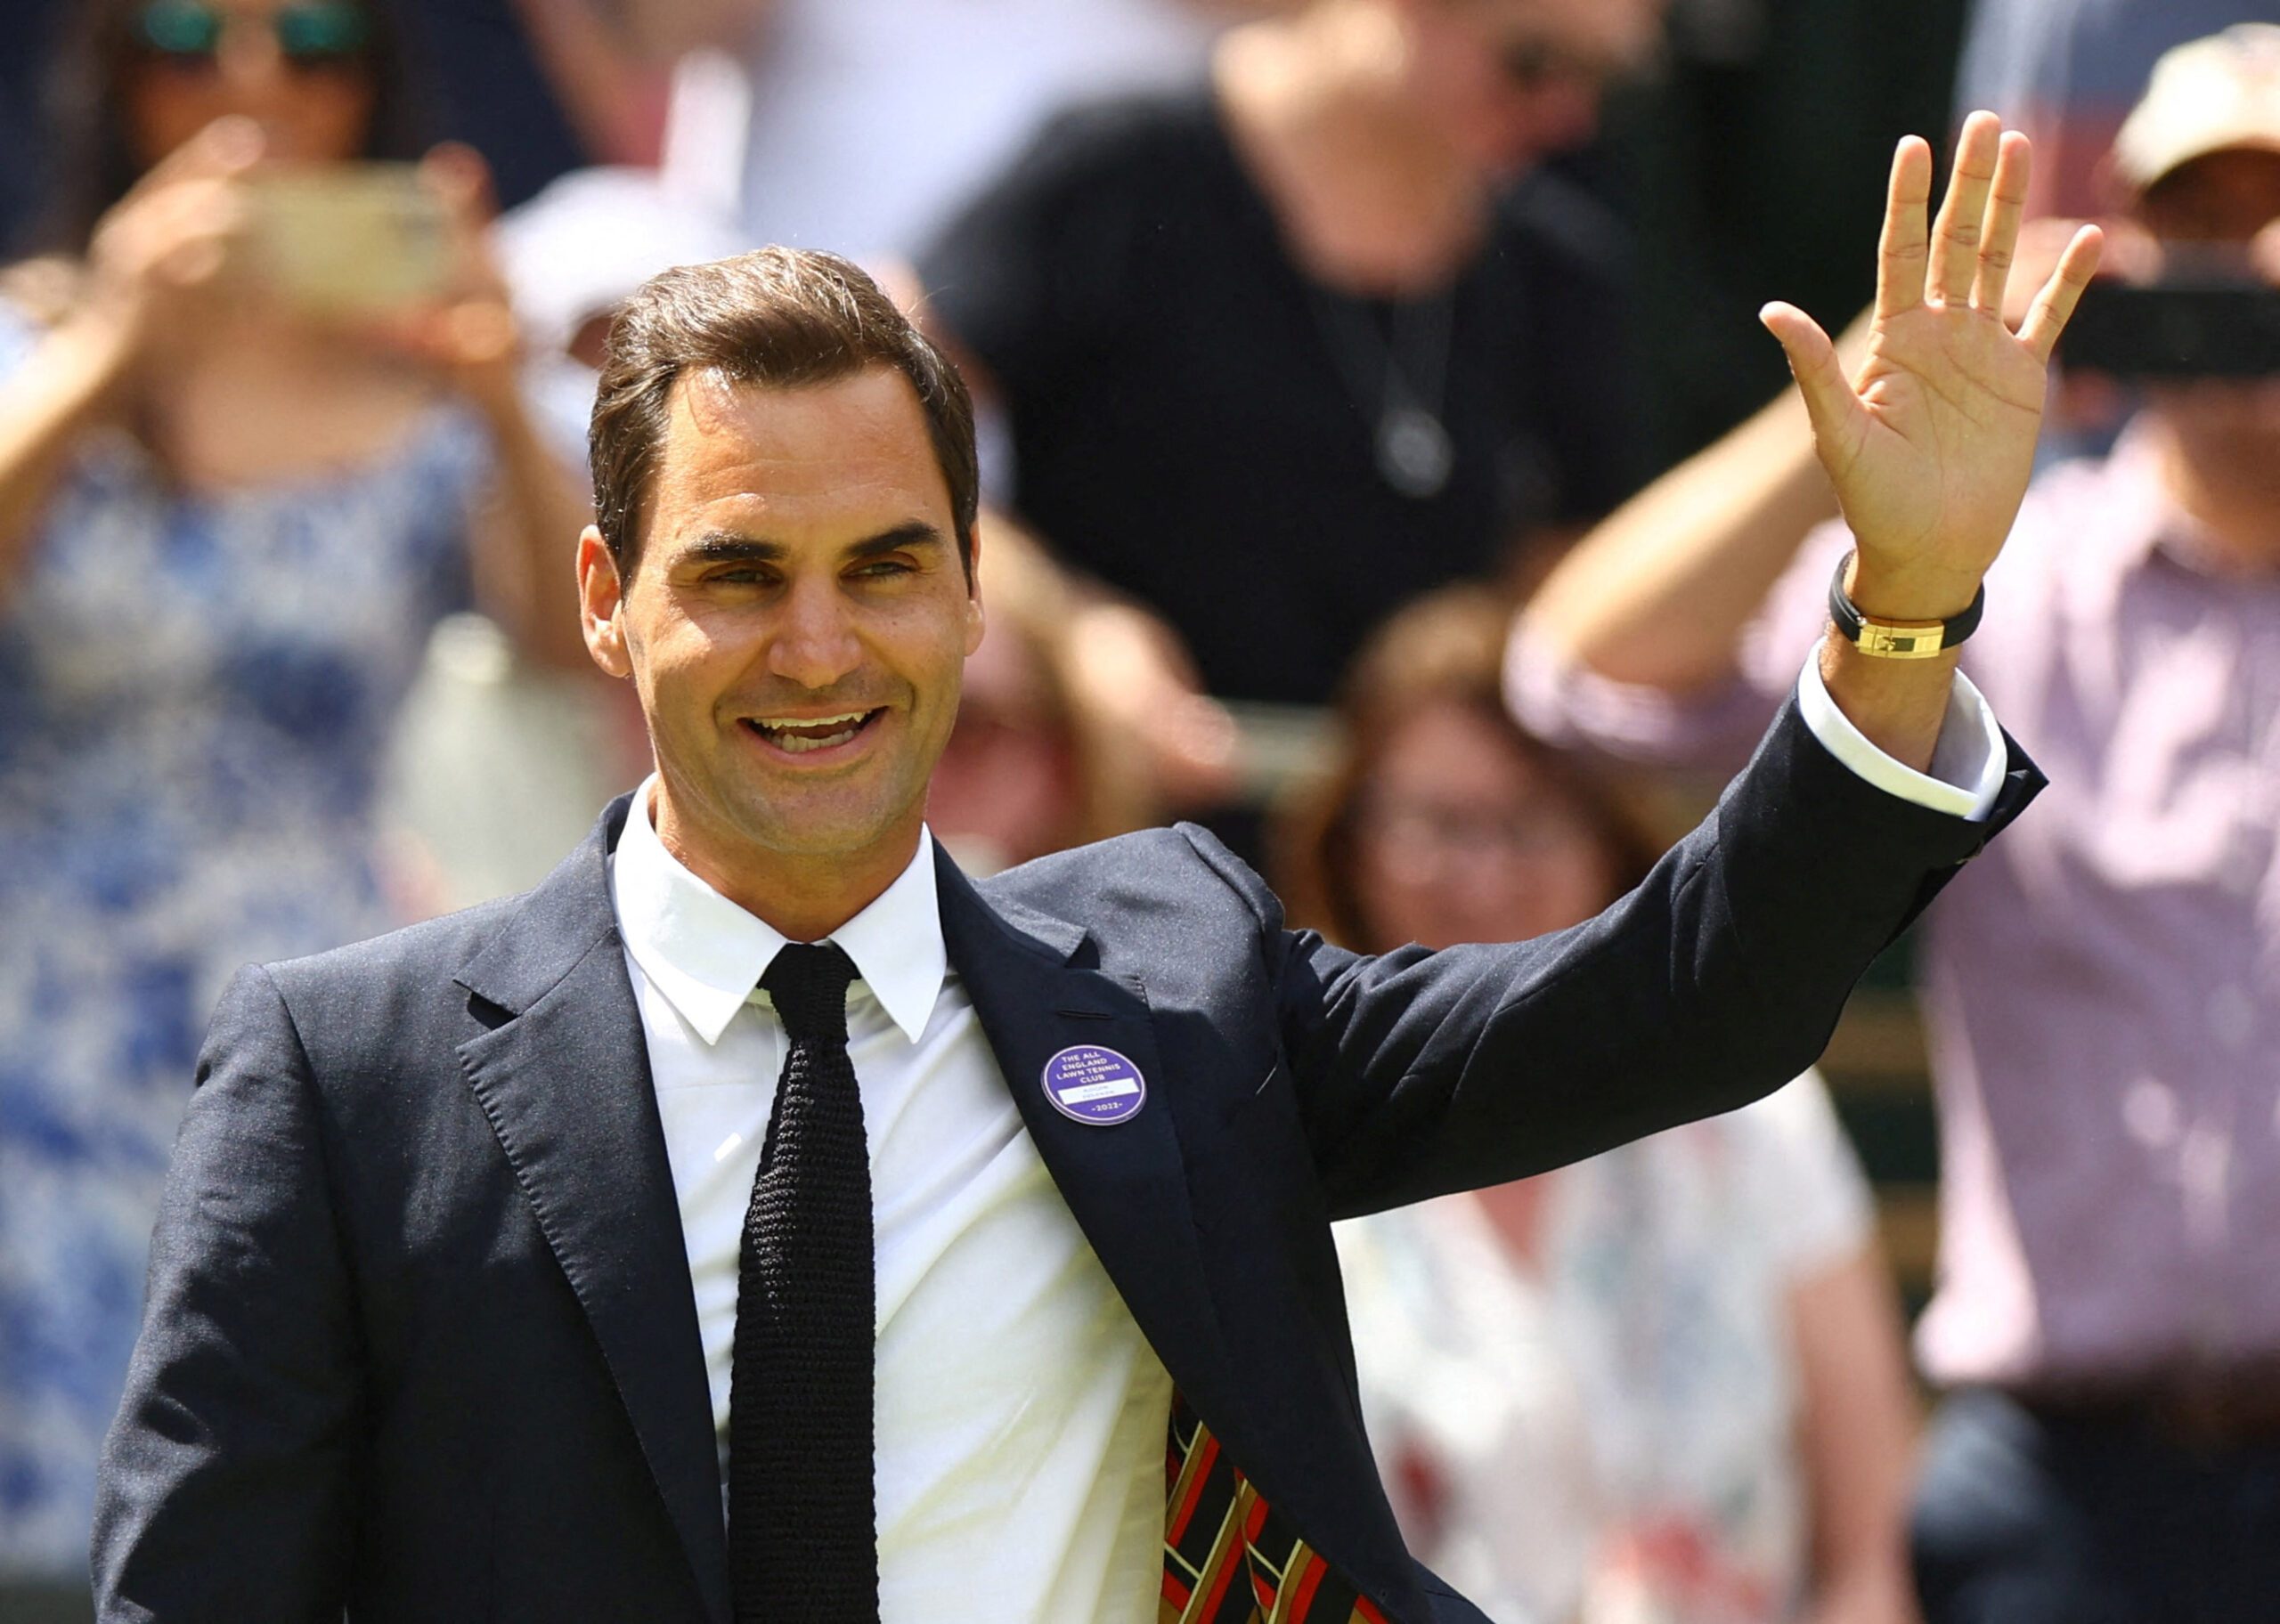 Federer highest paid player in 2022 despite yearlong absence – Forbes